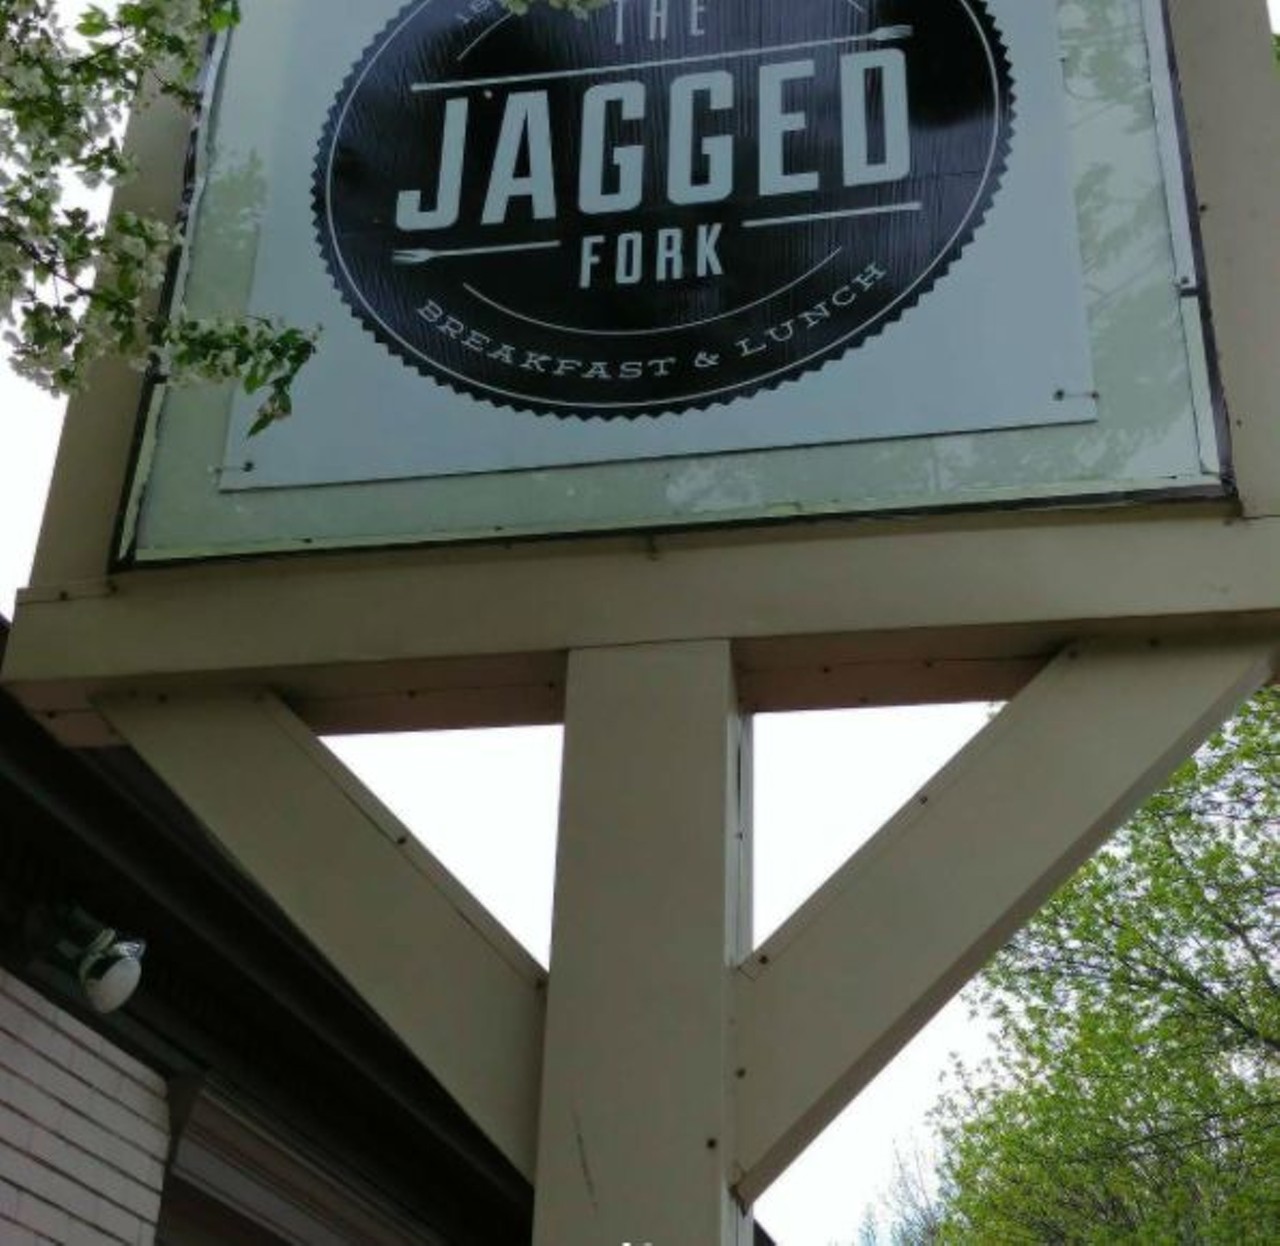 Jagged Fork
18480 Mack Ave., Grosse Pointe Farms, MI 48236- 313-458-8440
The Jagged Fork is known for their breakfast, brunch and lunch. If you are looking for Graham Cracker Crusted French Toast or Banana Nutella crepes, this is the place to go. An omelette with a side of pancakes, yes a side of pancakes, is sure to fill your stomach, but keep you wanting to come back for more.
(Photo via IG account @randrums)